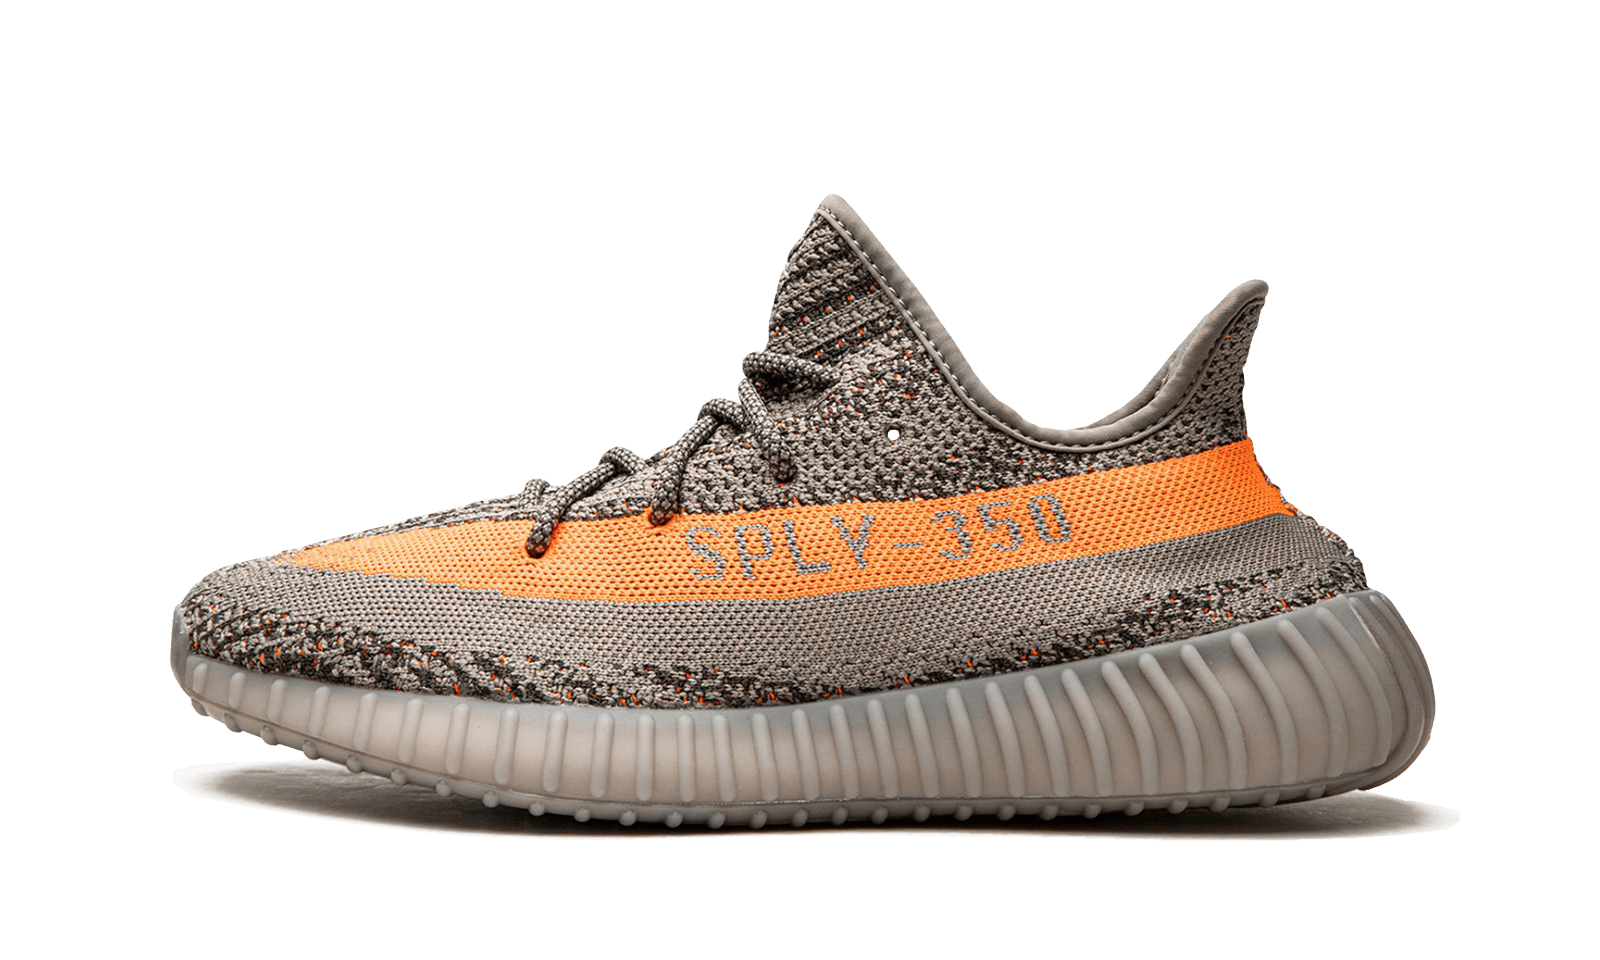 Best quality Adidas Yeezy Boost 350 V2 Beluga Reflective for 225 USD